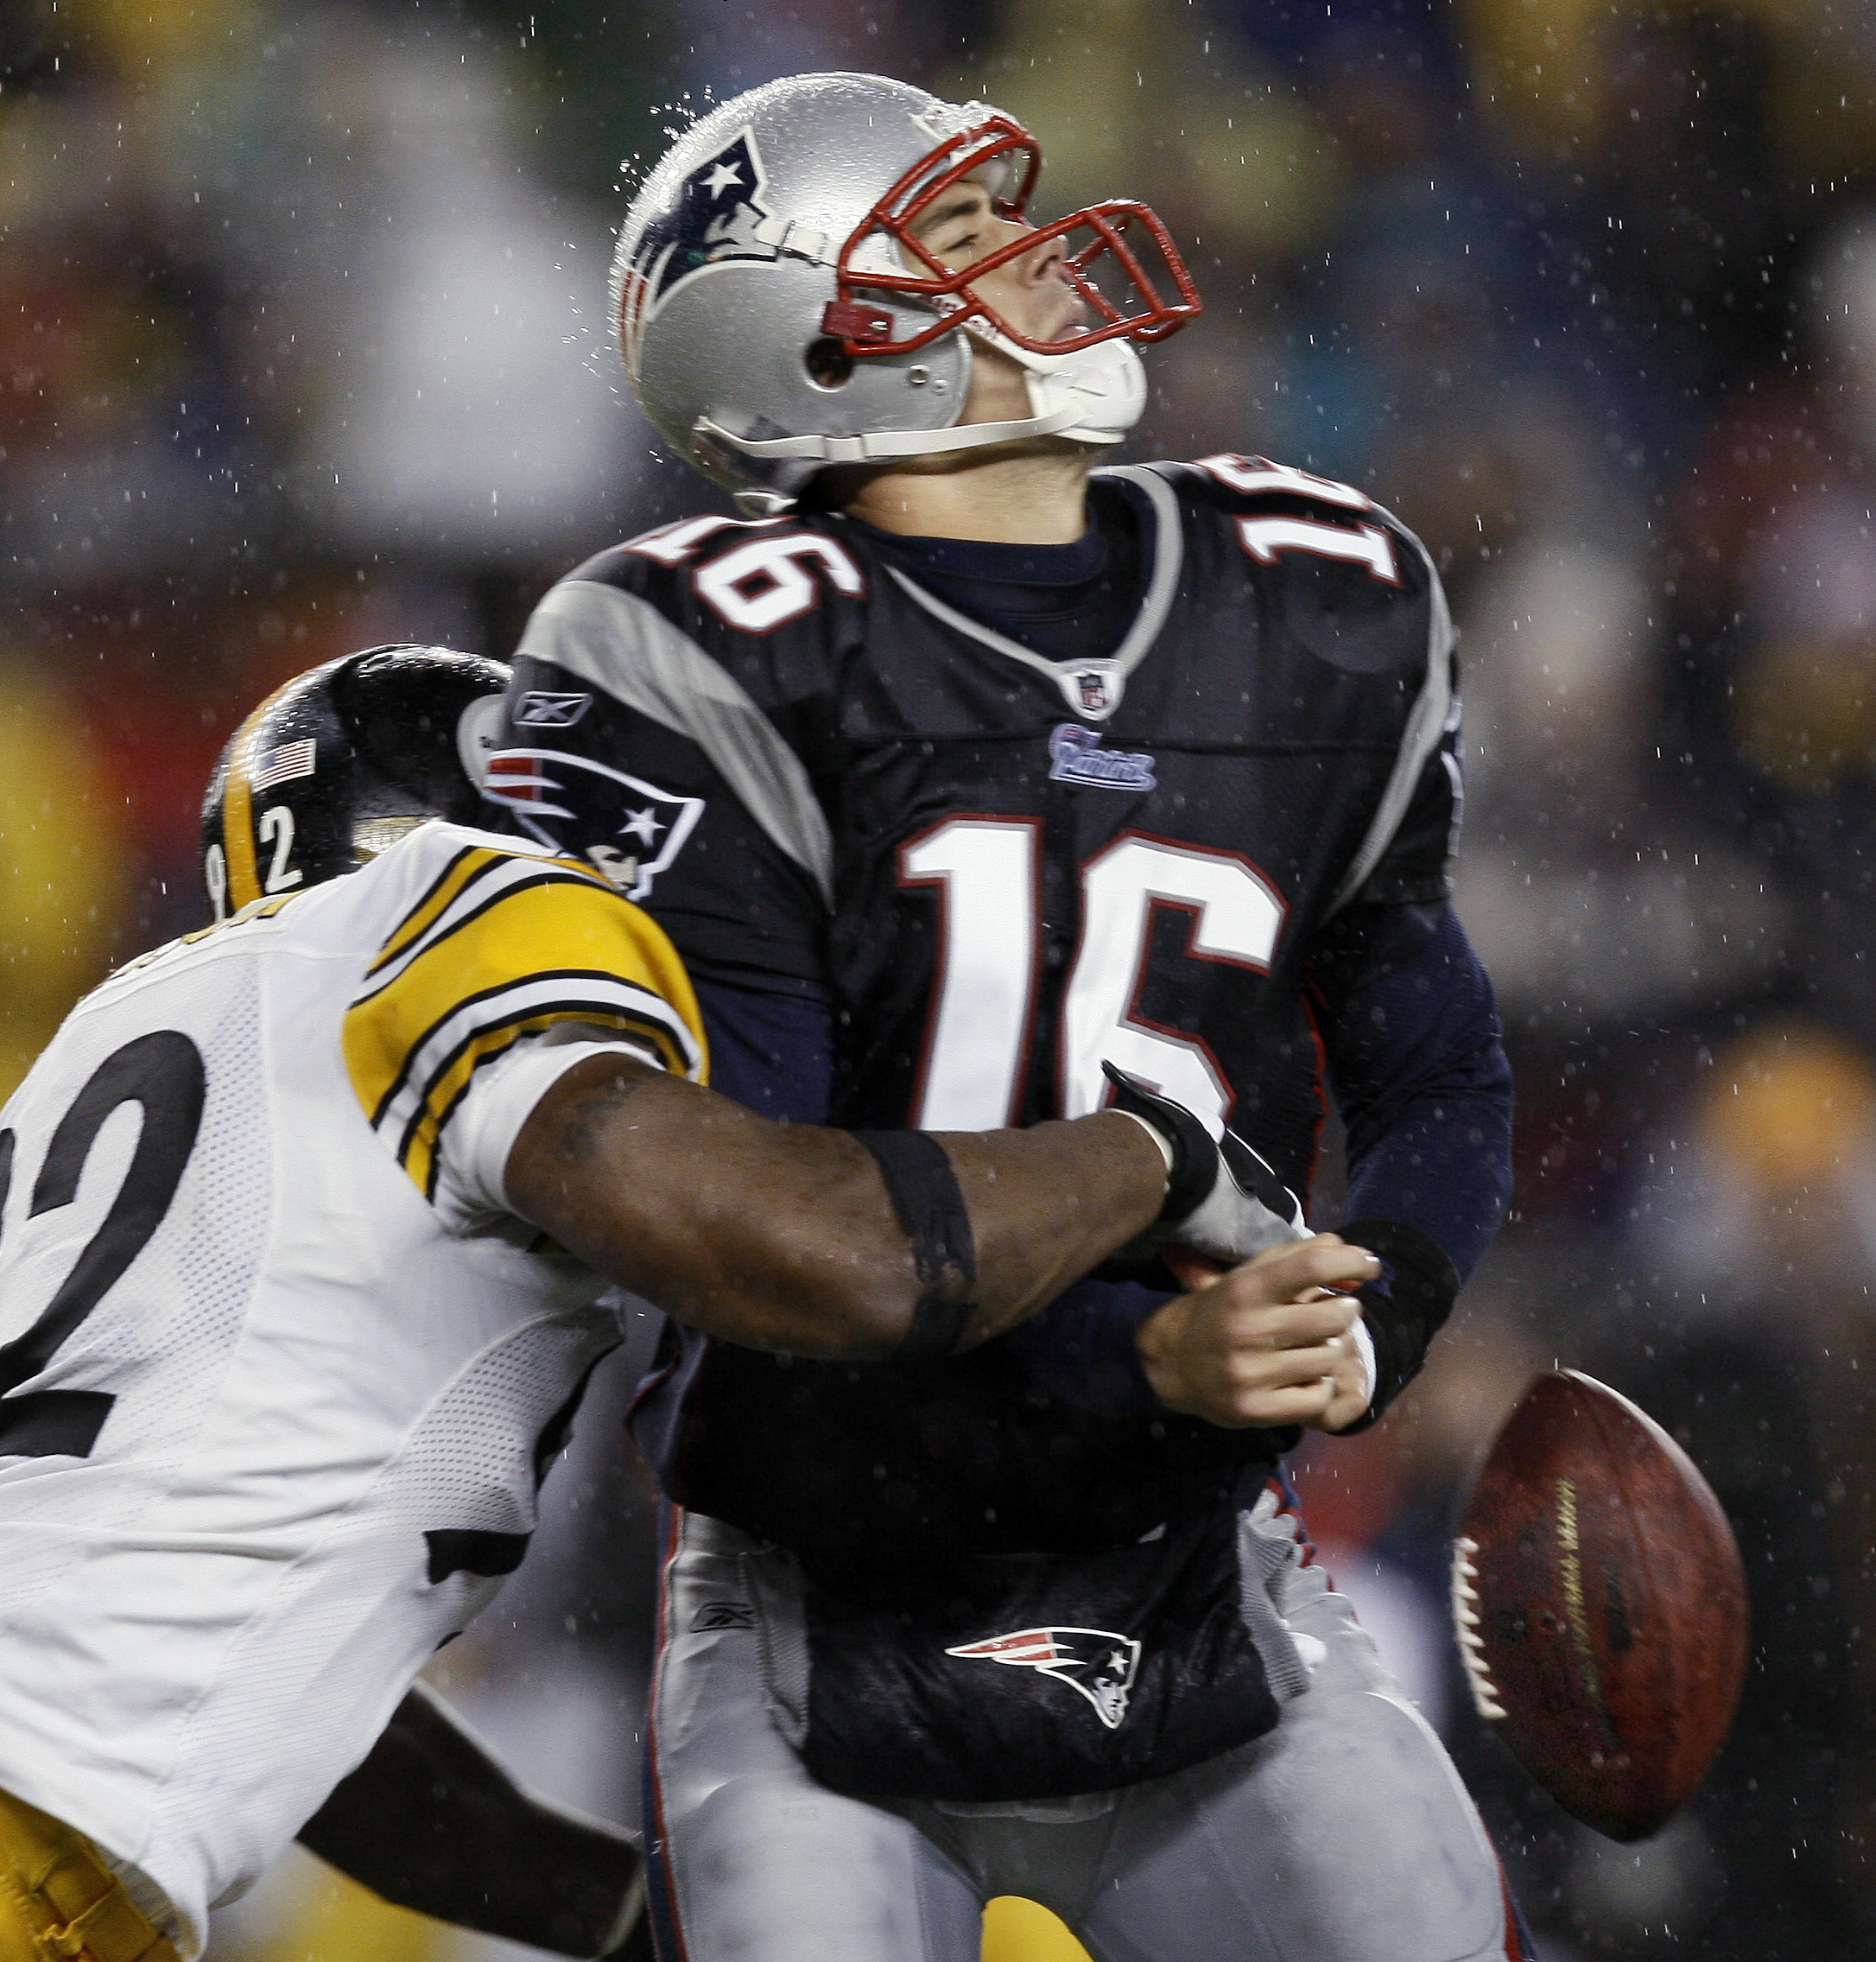 In 2008, the Steelers had the pleasure of going on the road to New England and feasting on Tom Brady's sub at QB, Matt Cassel. In 2016, the Patriots have a chance to return the favor in Pittsburgh with QB Landry Jones starting in place of the injured Ben Roethlisberger. (AP Photo/Winslow Townson)